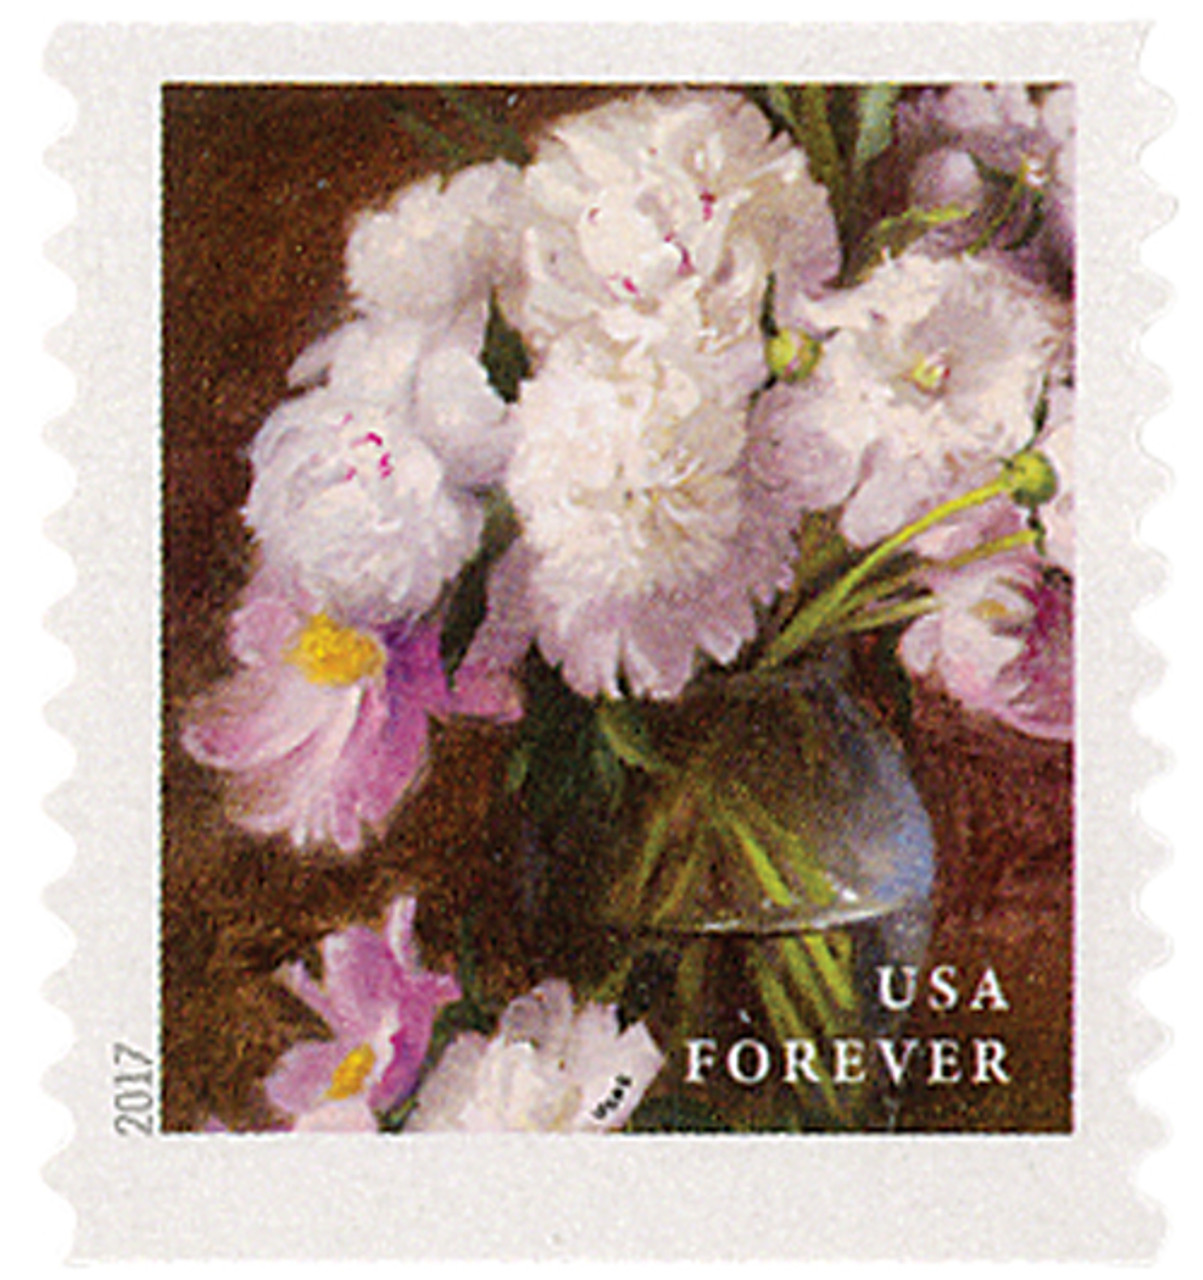 White Hydrangea and Pink/Purple Rose Forever Stamps // Set of 10